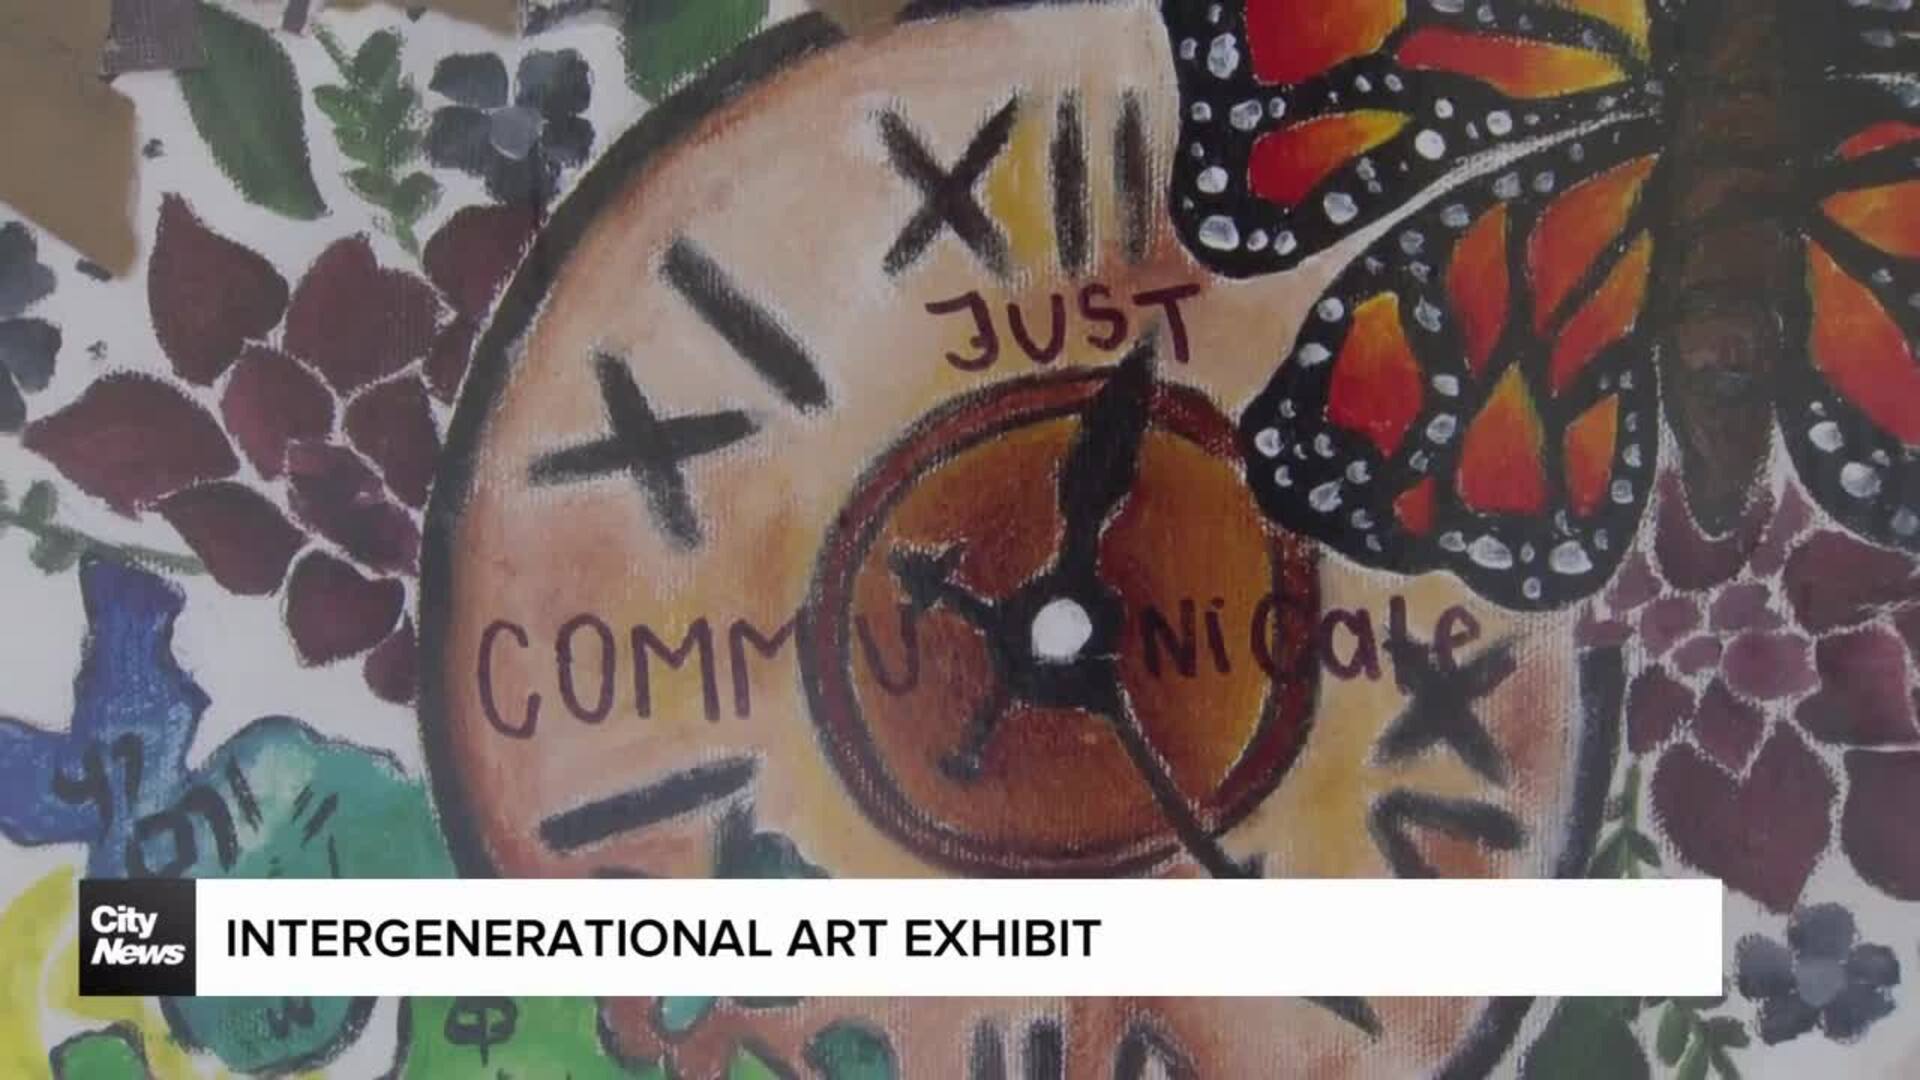 Intergenerational art exhibit shows off collaboration between seniors and youth